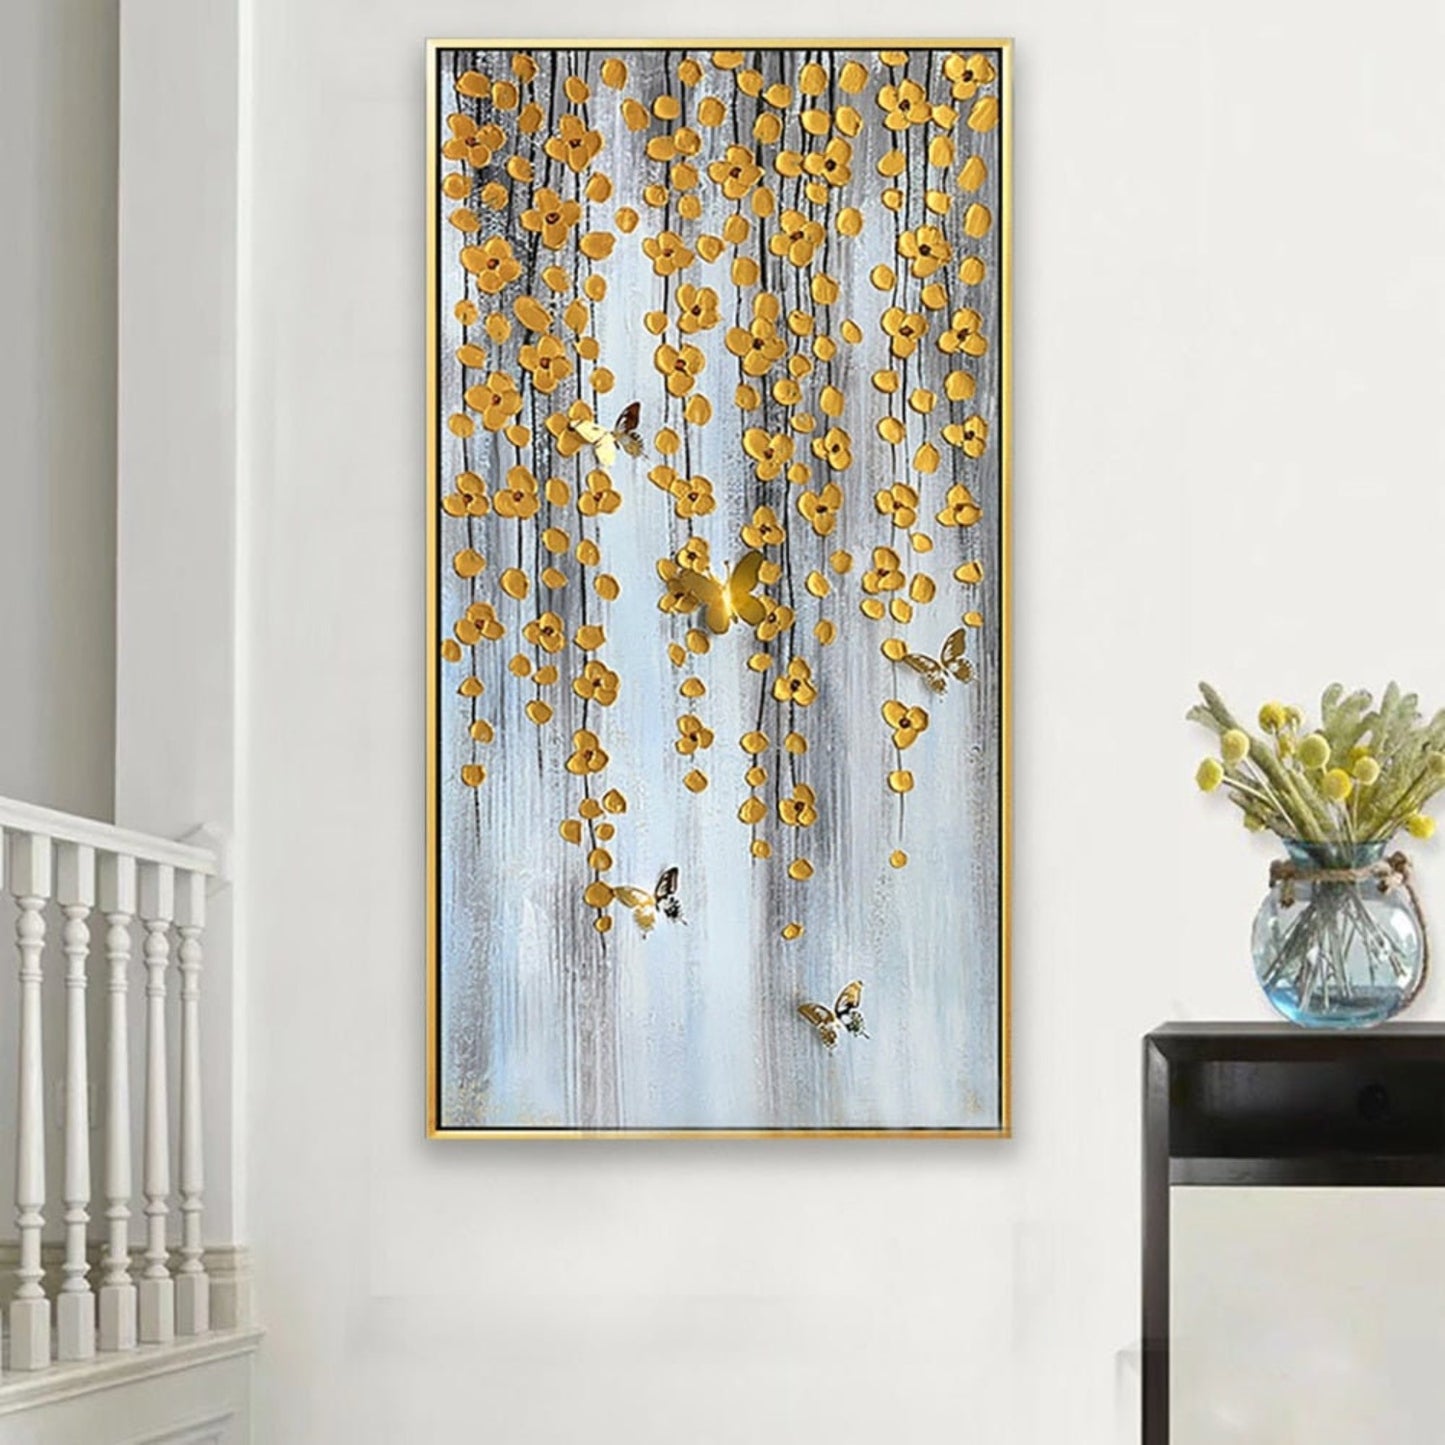 Golden Flowers 100% Hand Painted Wall Hanging Art